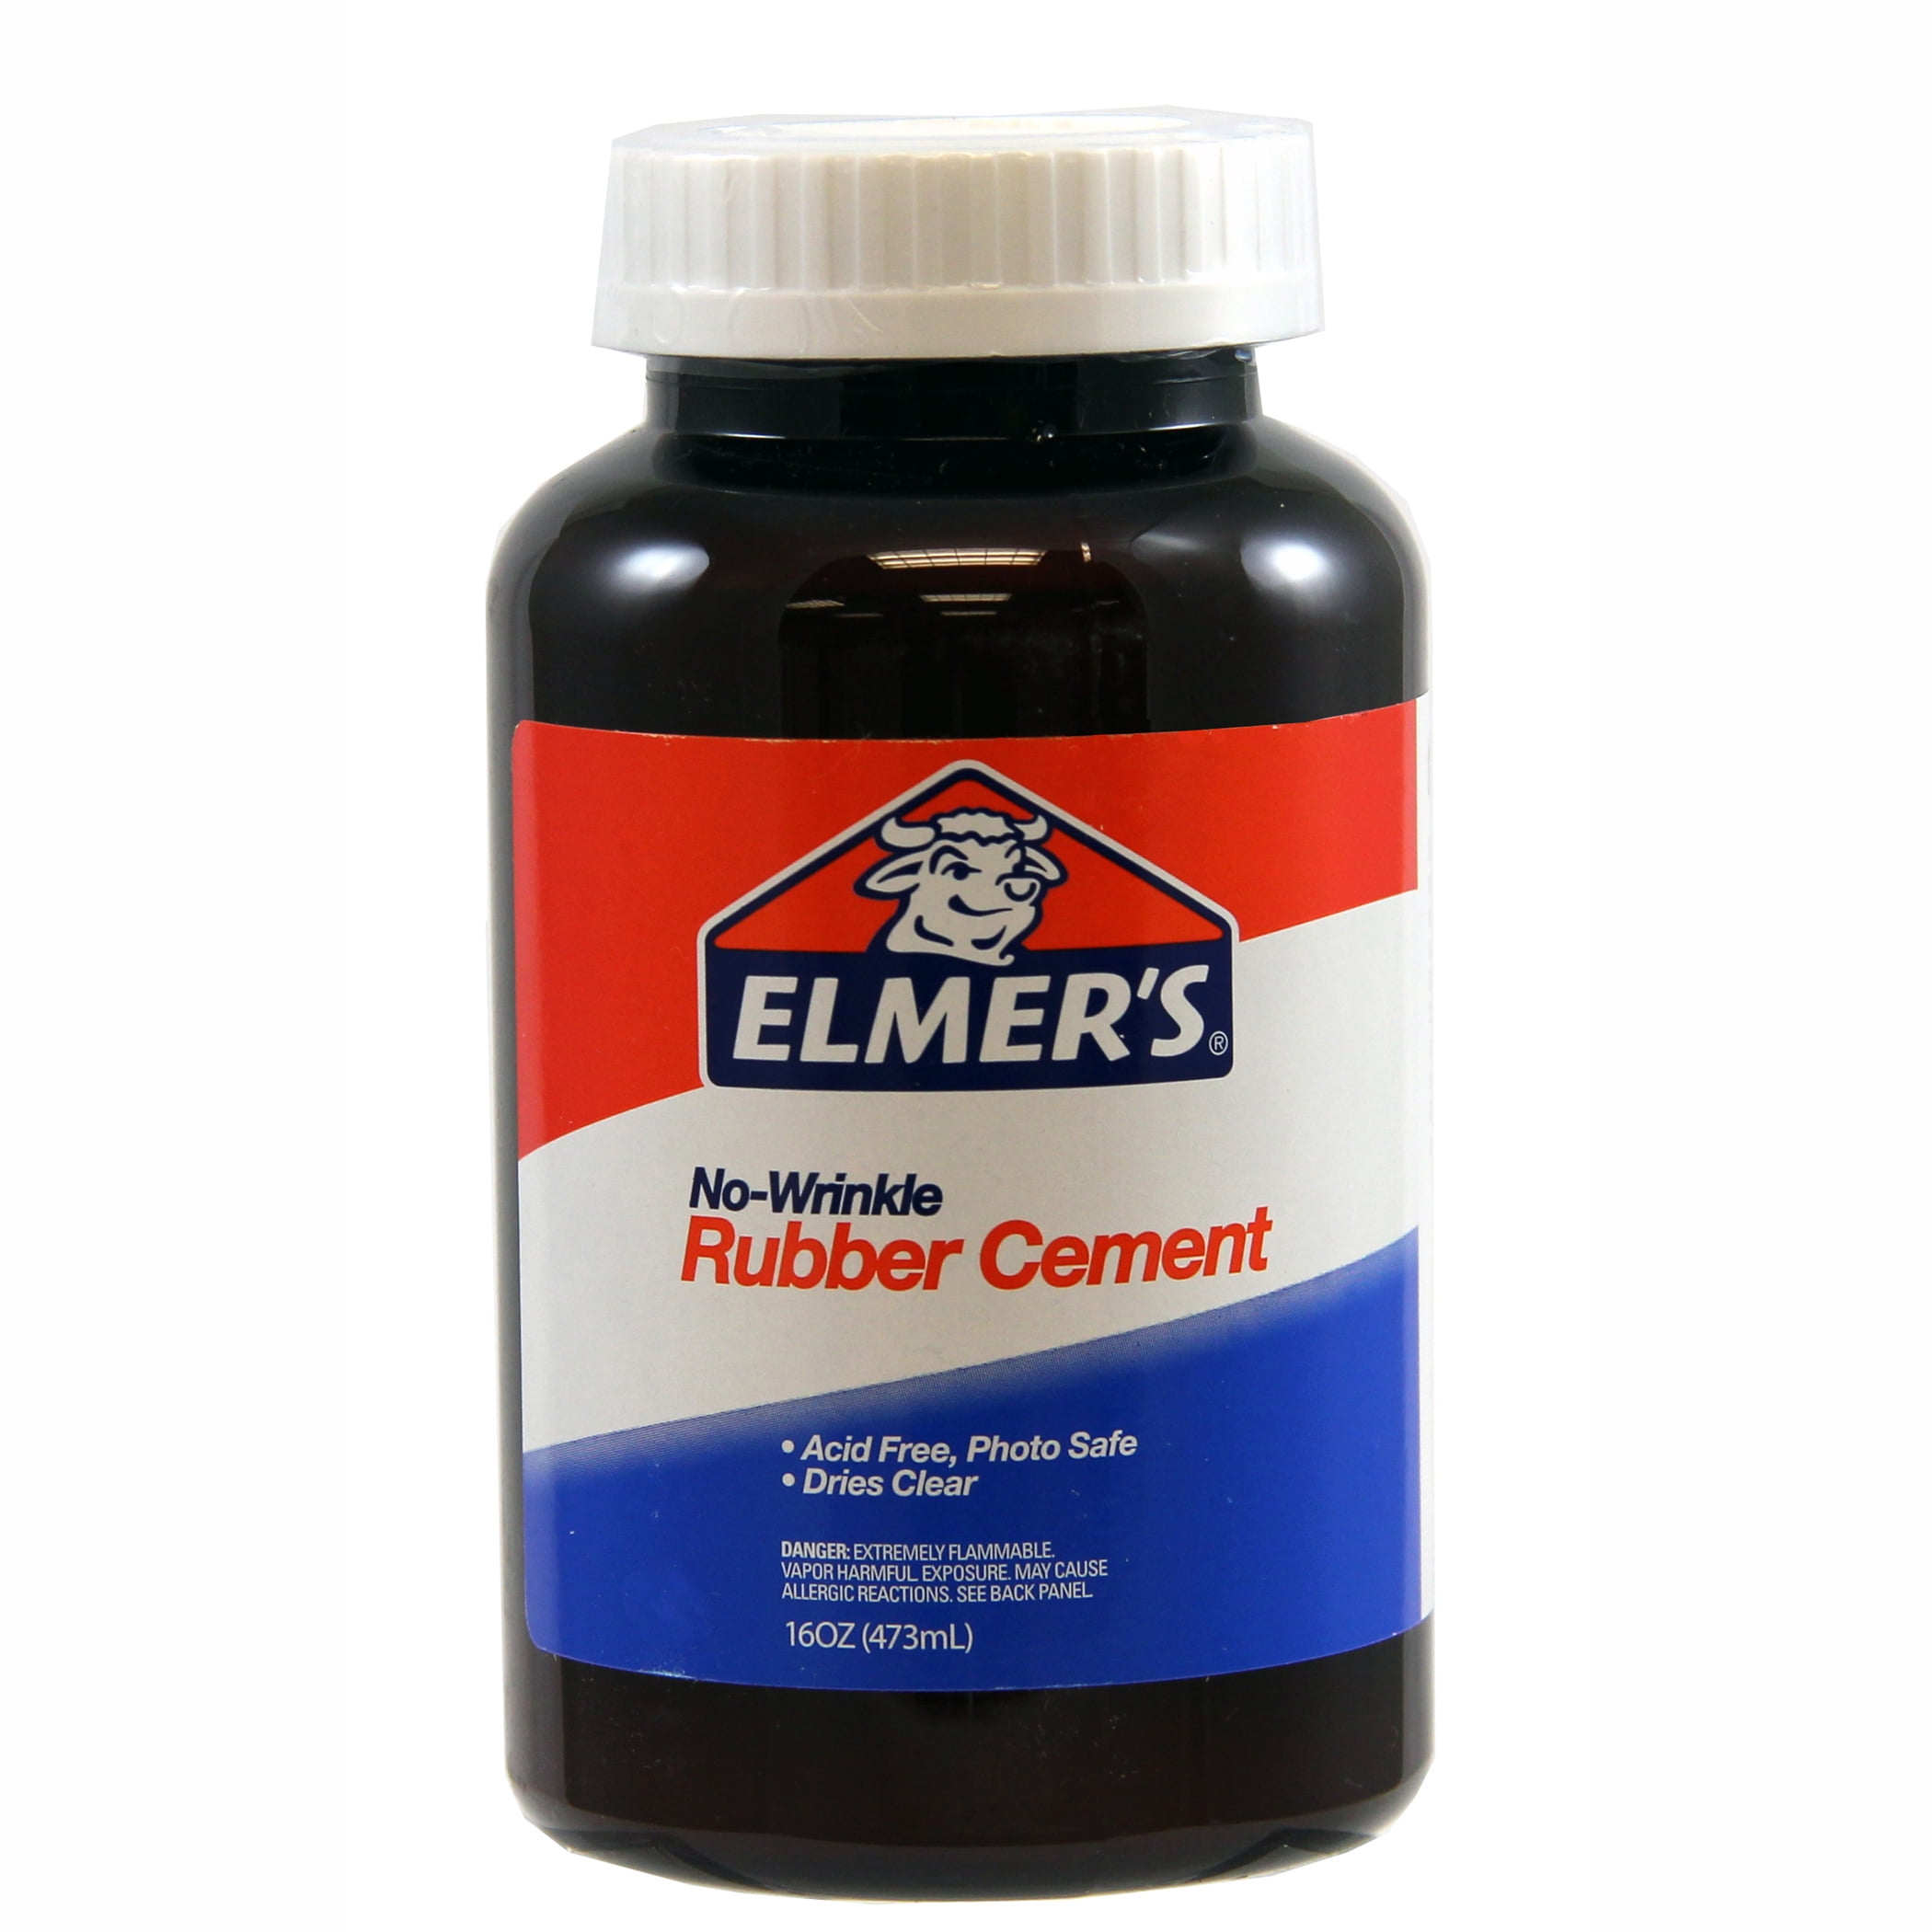 Saturn Magic Shop on X: Sometimes we just want some good old  fashionedglue! Yes you heard us right - GLUE! @Elmers Rubber Cement is a  multi purpose adhesive with all kinds of